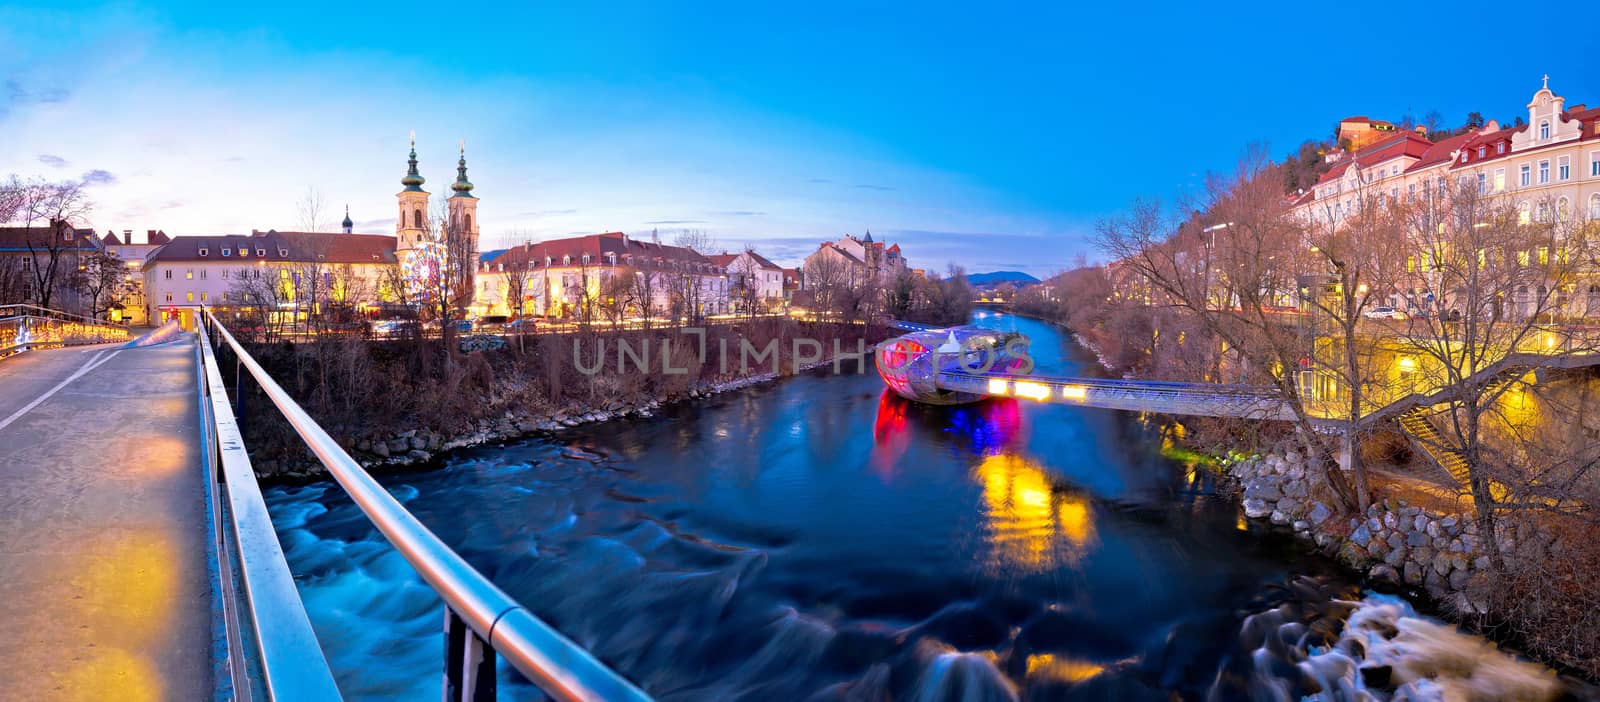 City of Graz Mur river and island evening view by xbrchx